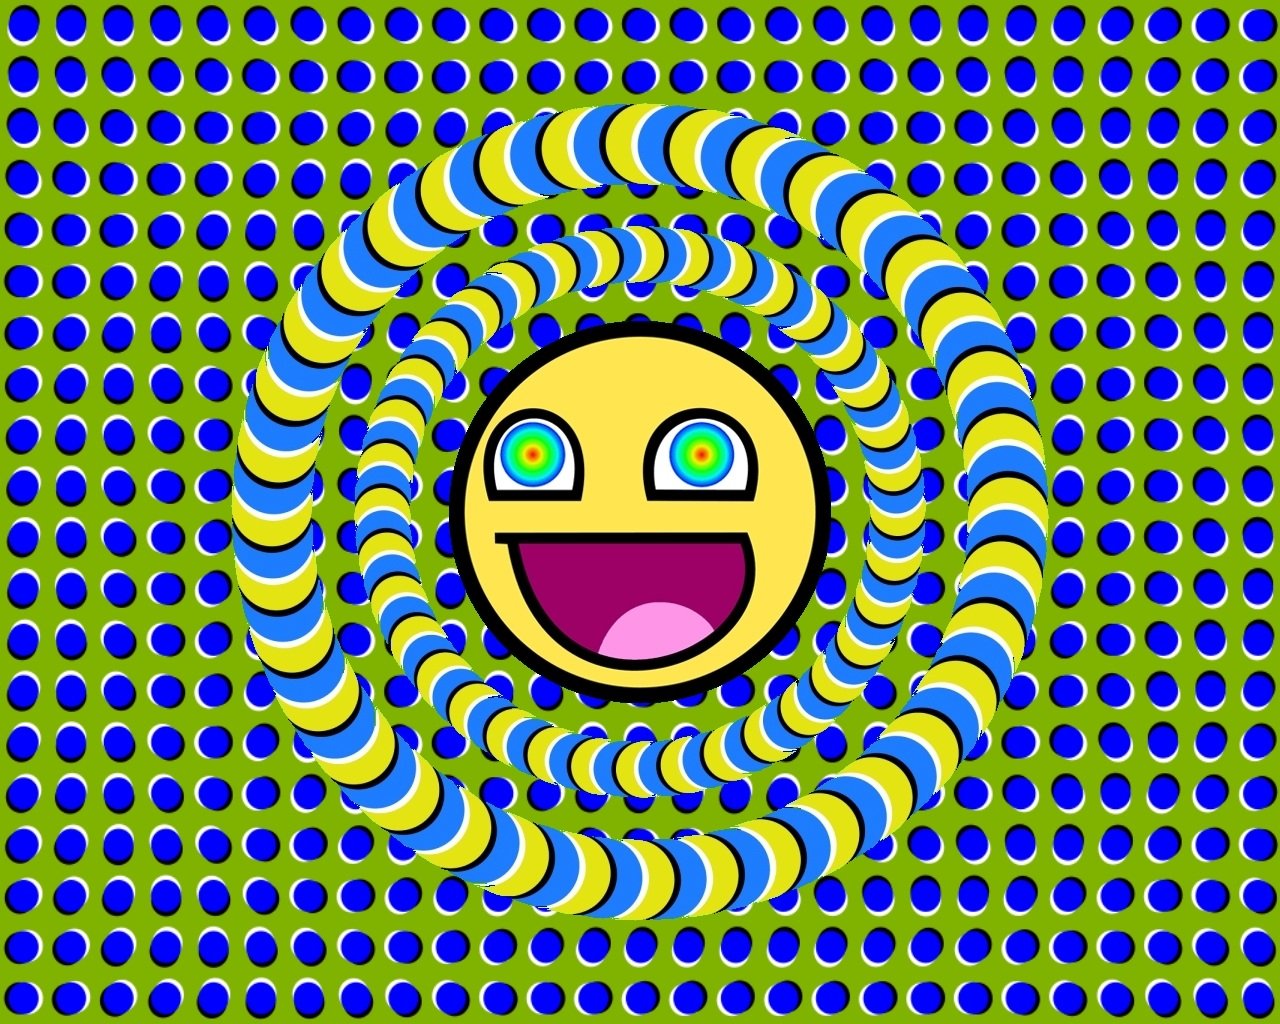 Psychedelic Awesome Smiley Wallpaper - Ilusão De Ótica Movimento , HD Wallpaper & Backgrounds